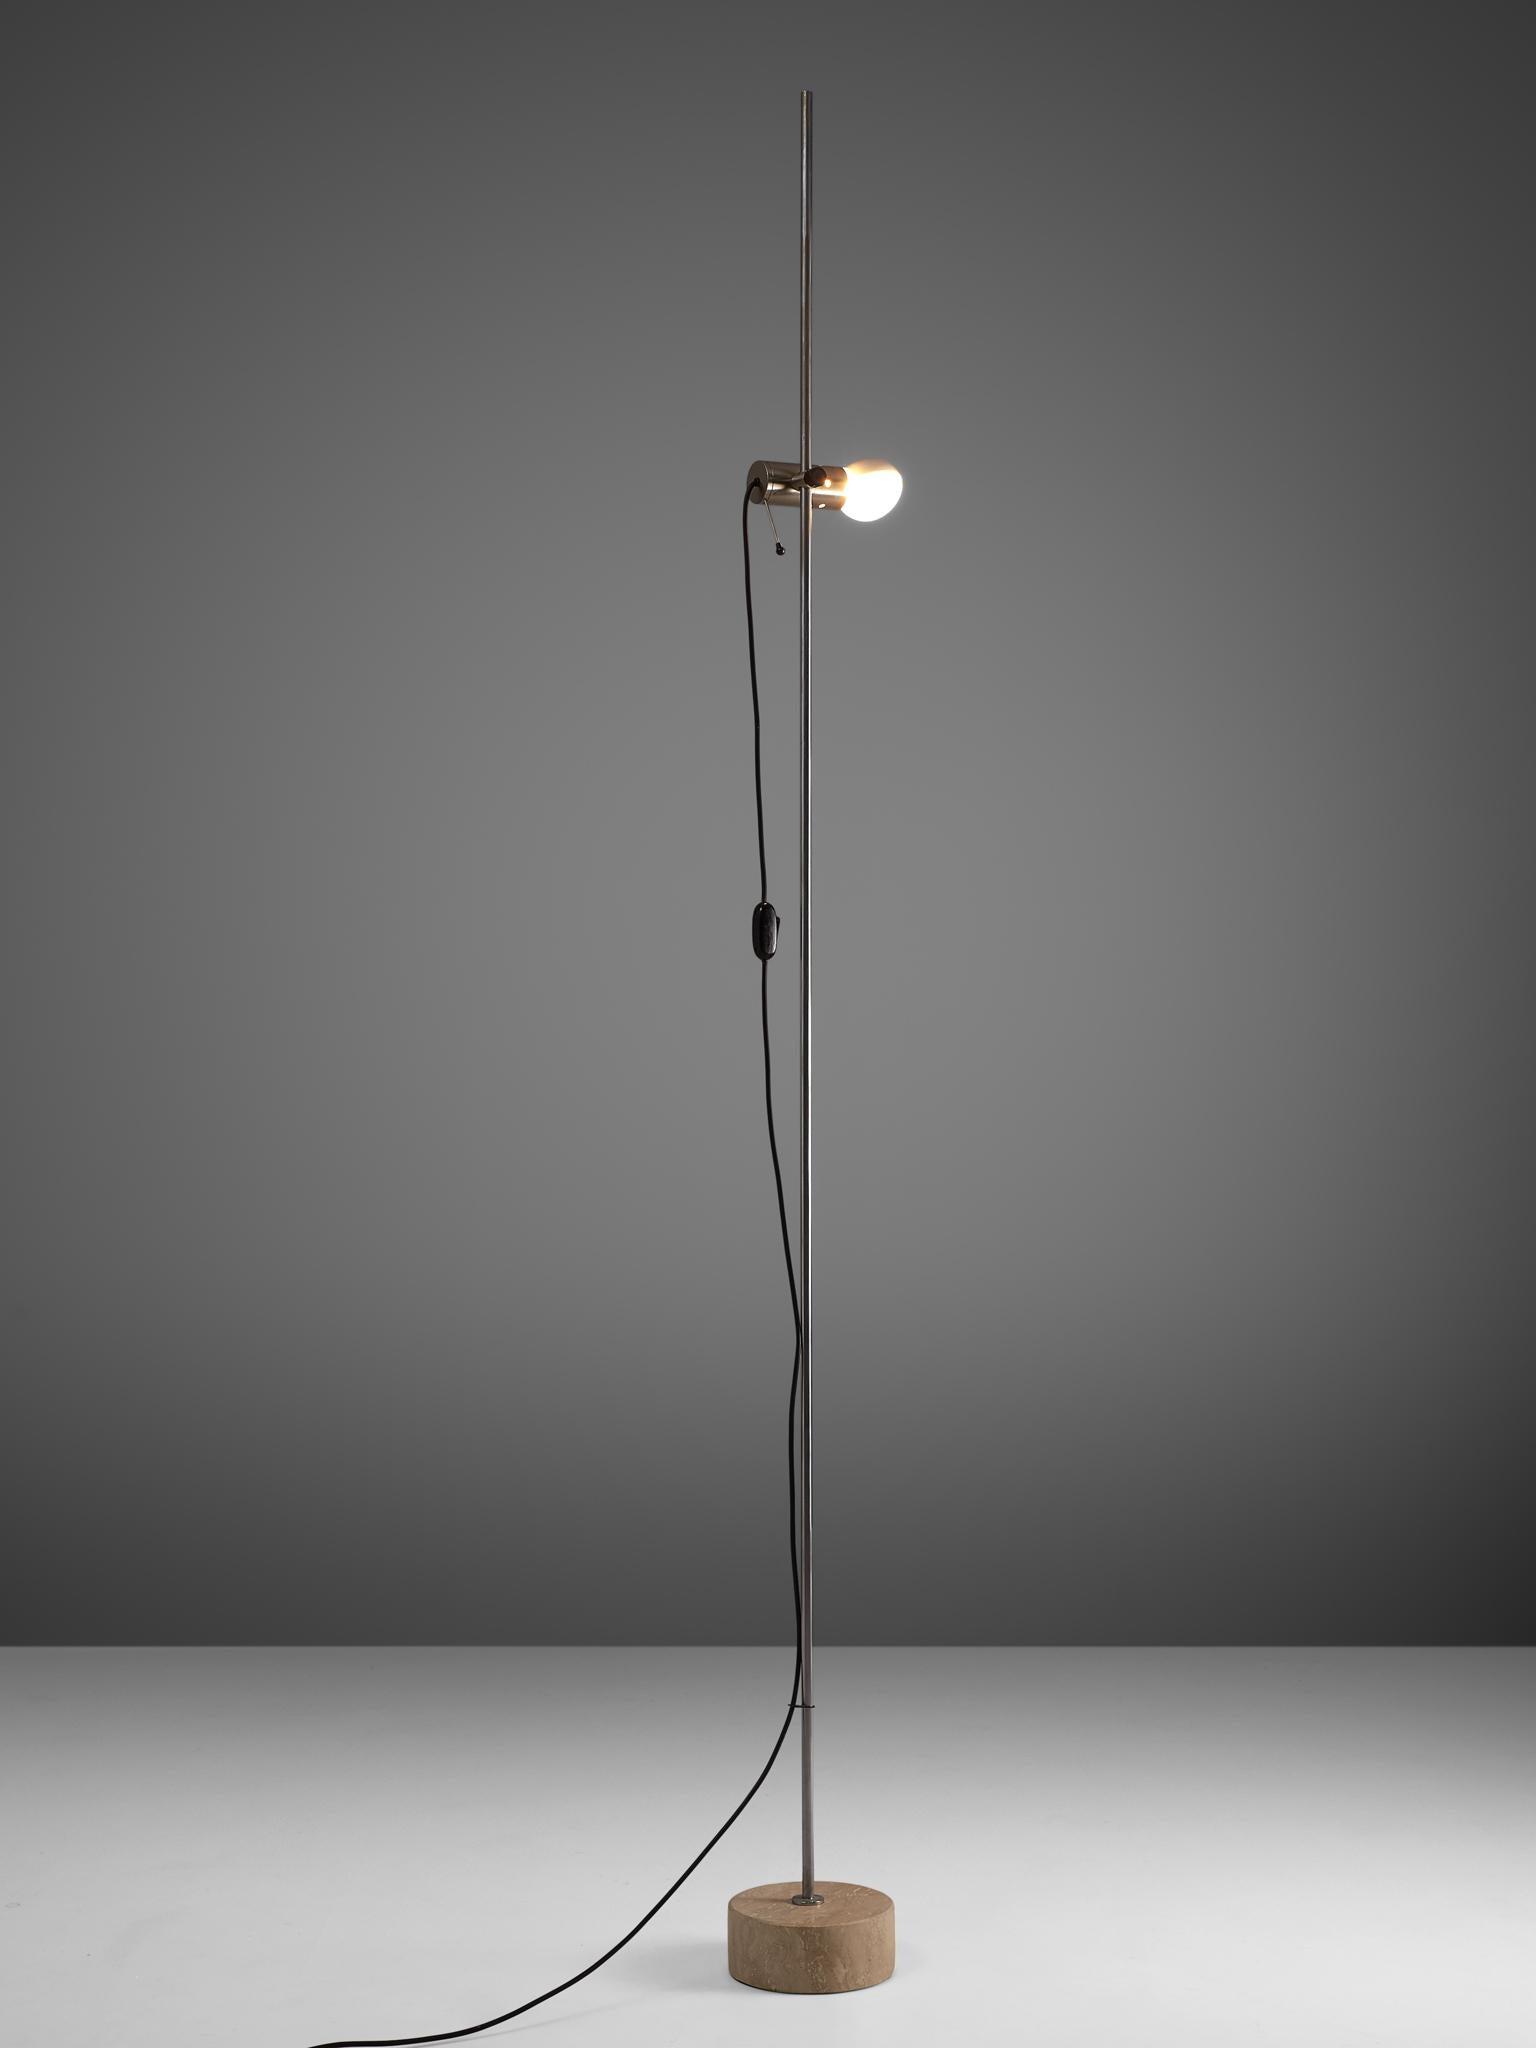 Tito Agnoli for O-Luce, floor lamp model 387, metal and travertine, Italy, design 1954, later production.

Designed in 1954, this refined floor lamp is now considered to be a key piece of Modern Minimalism. Executed in metal and with a travertine